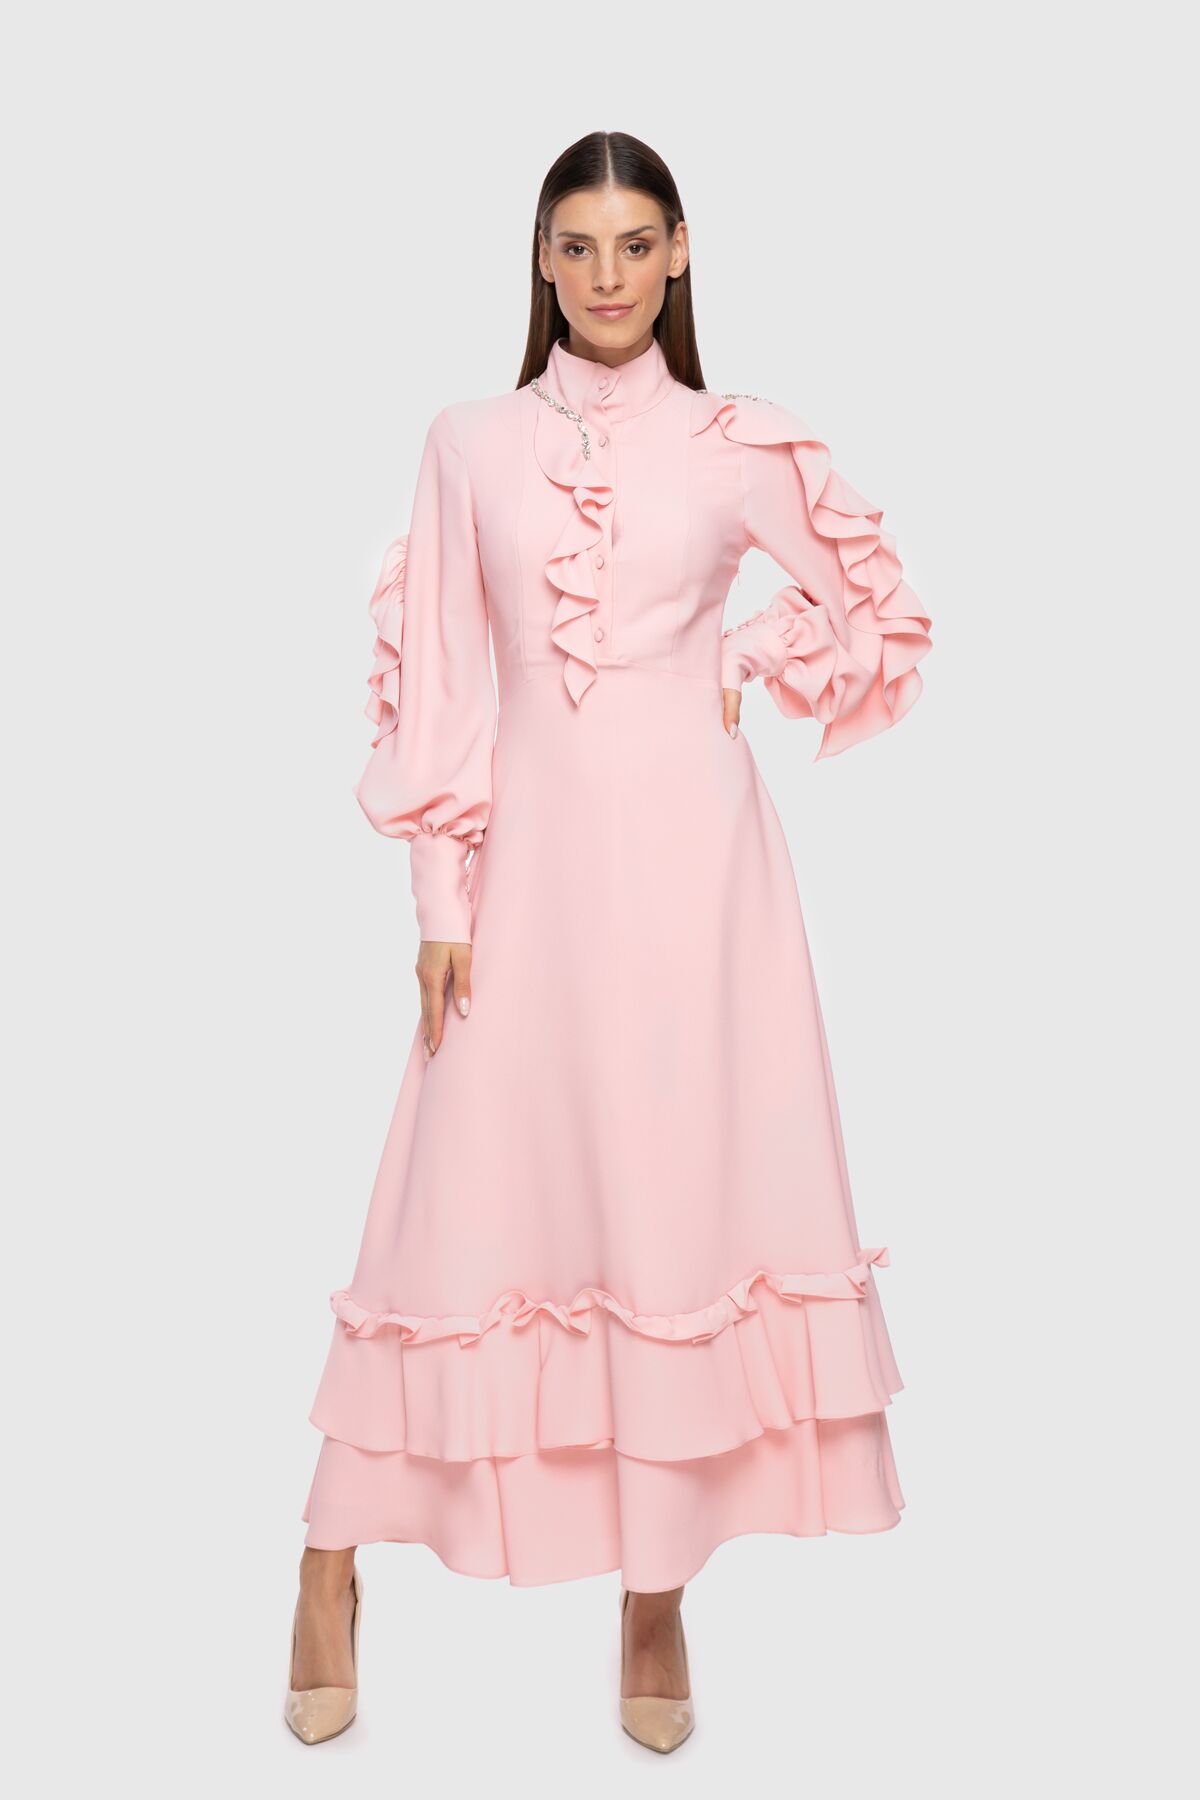  GIZIA - Flywheel And Embroidered Detail Stand Up Collar Pink Crepe Dress